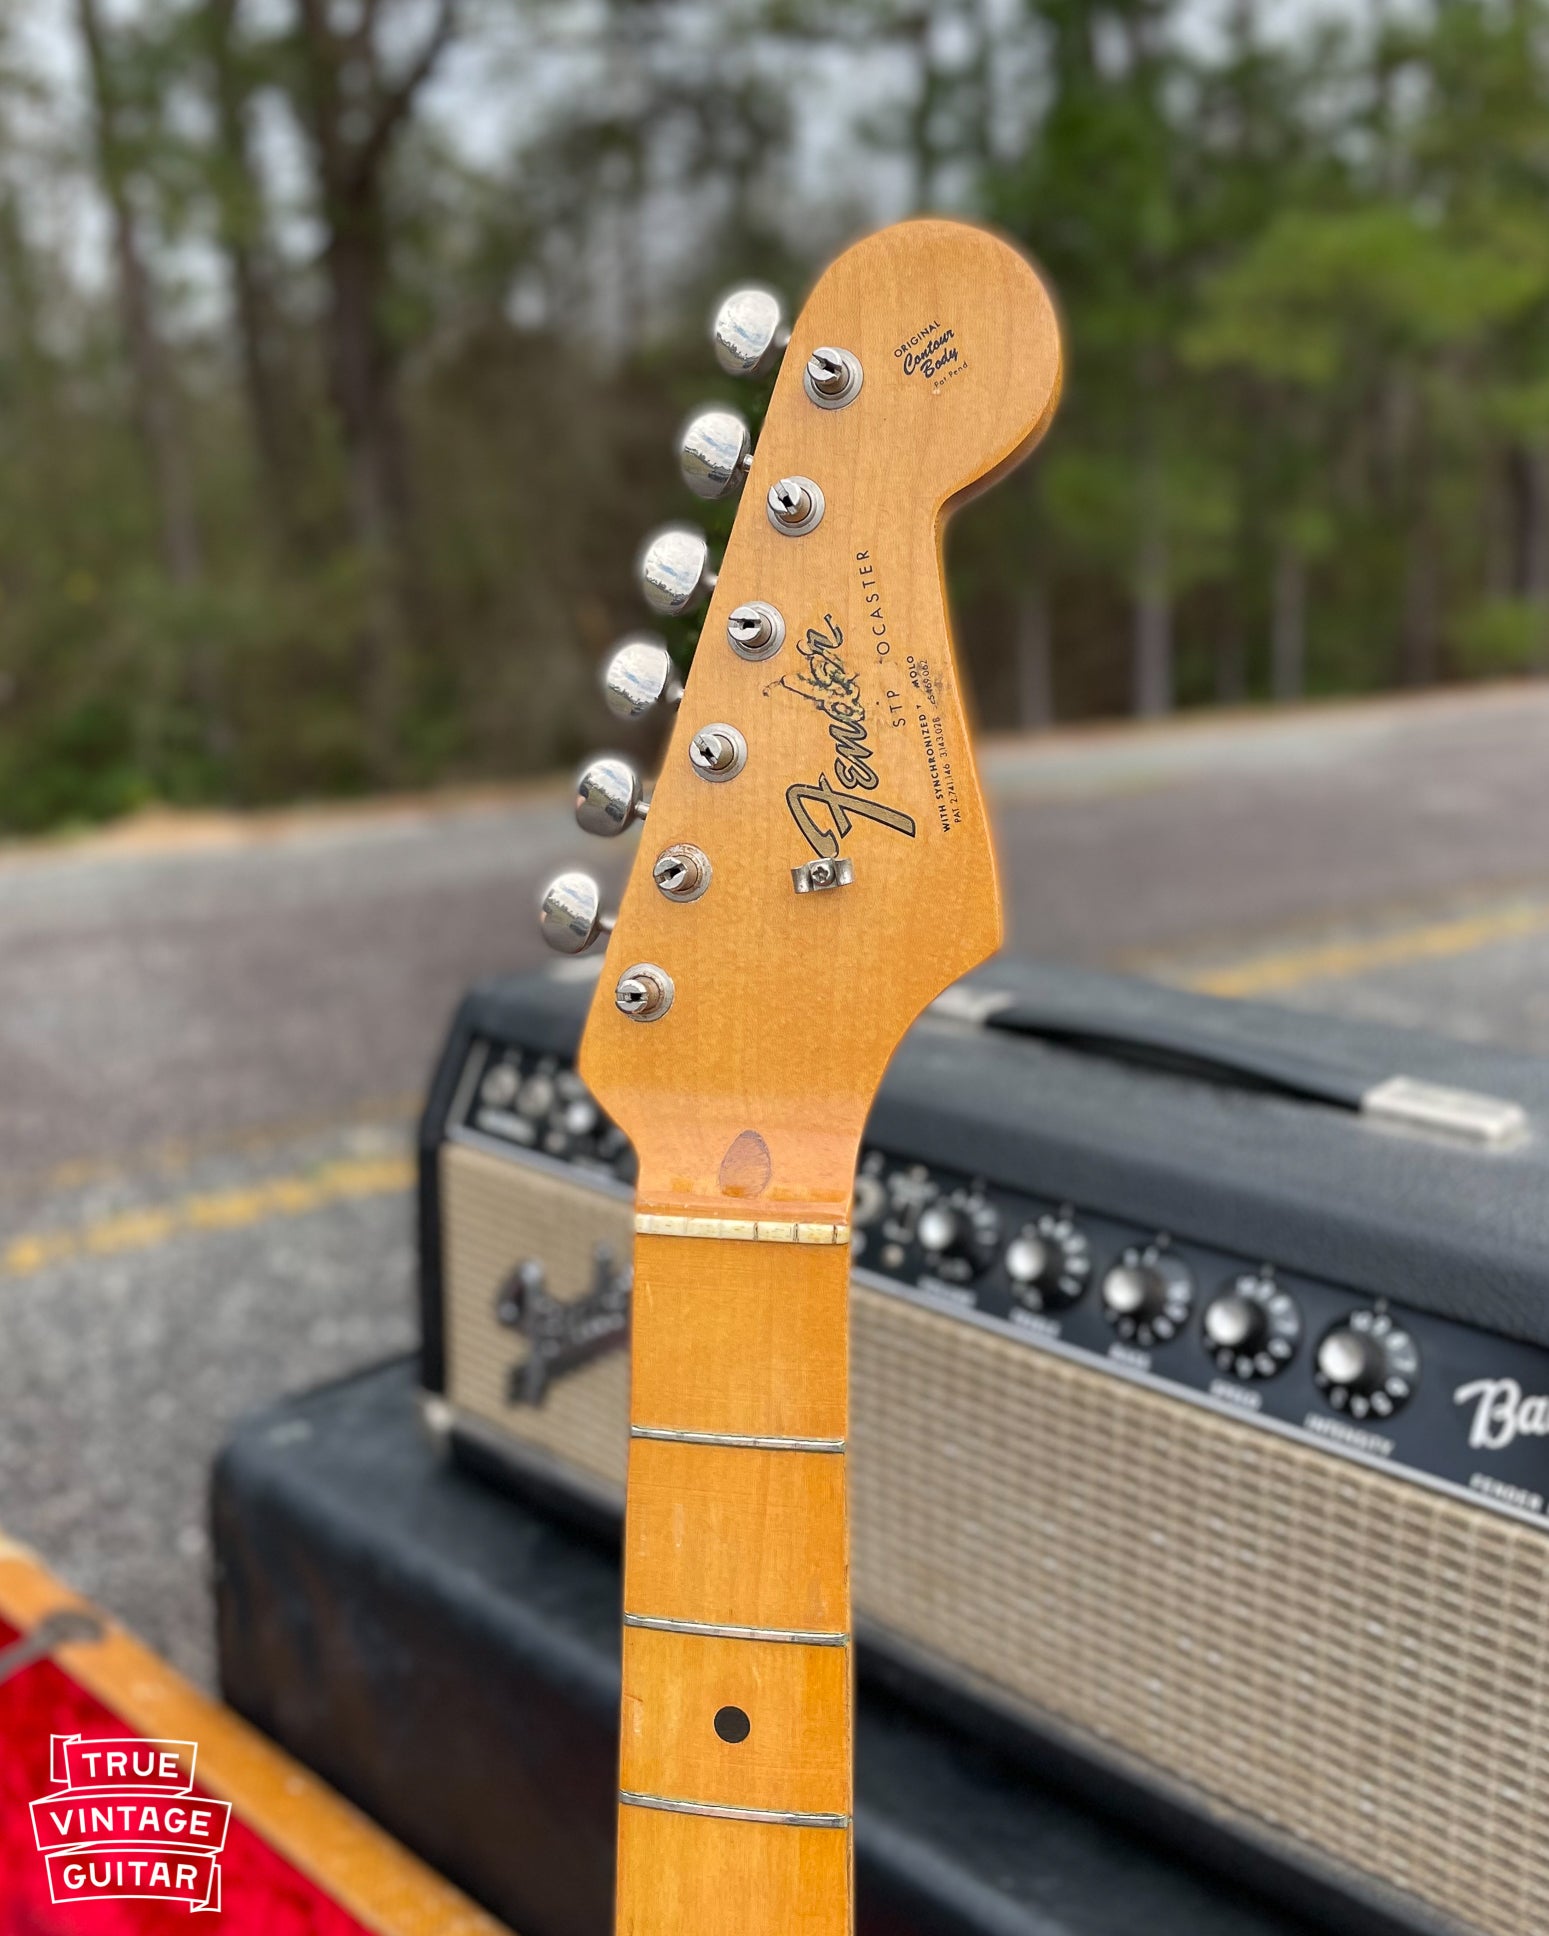 Fender Stratocaster 1954 neck with 1965 era transitional logo hiding previous string tree placement.